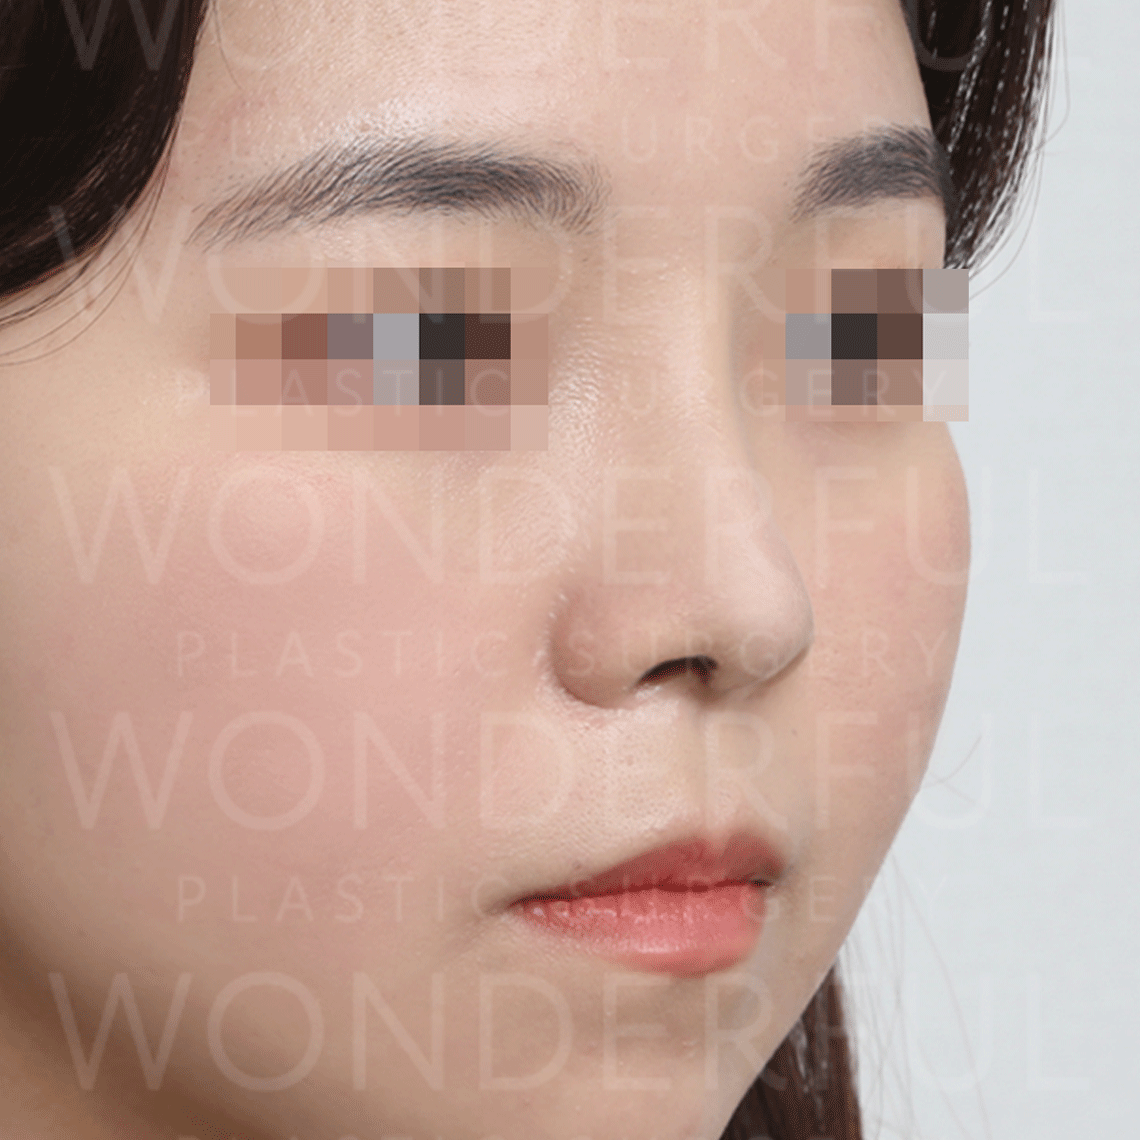 wonderful-plastic-surgery-hospital-korea-nose-rhinoplasty-before-after-results-after-2